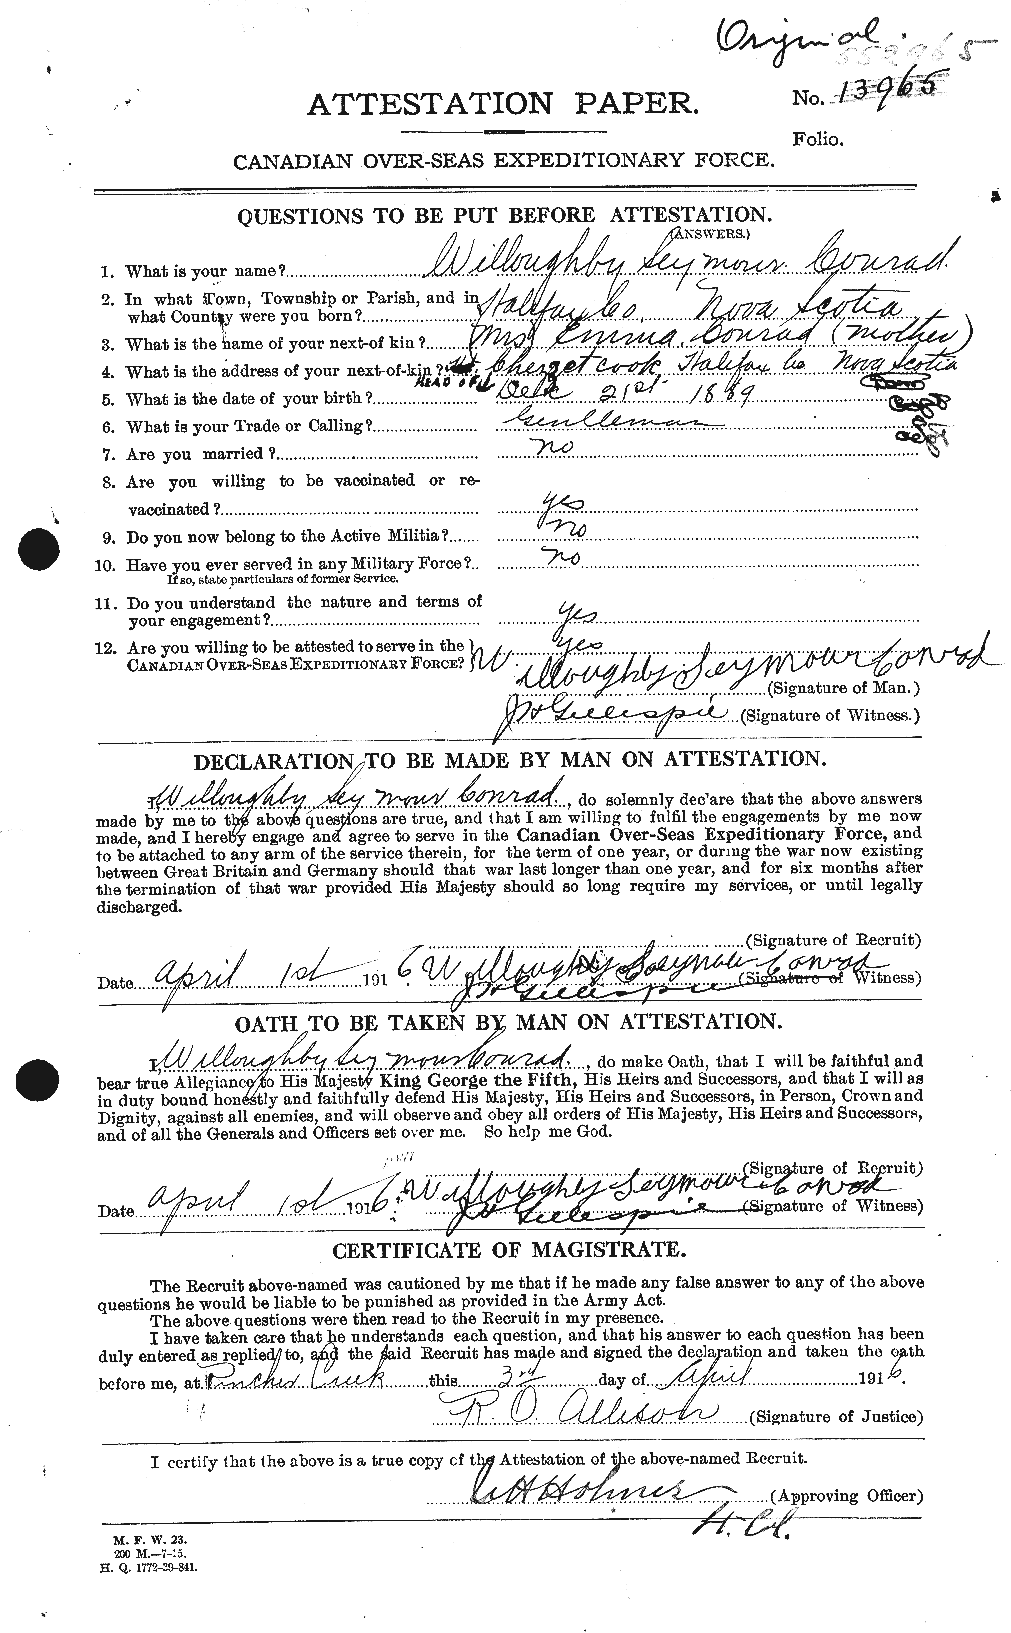 Personnel Records of the First World War - CEF 070834a